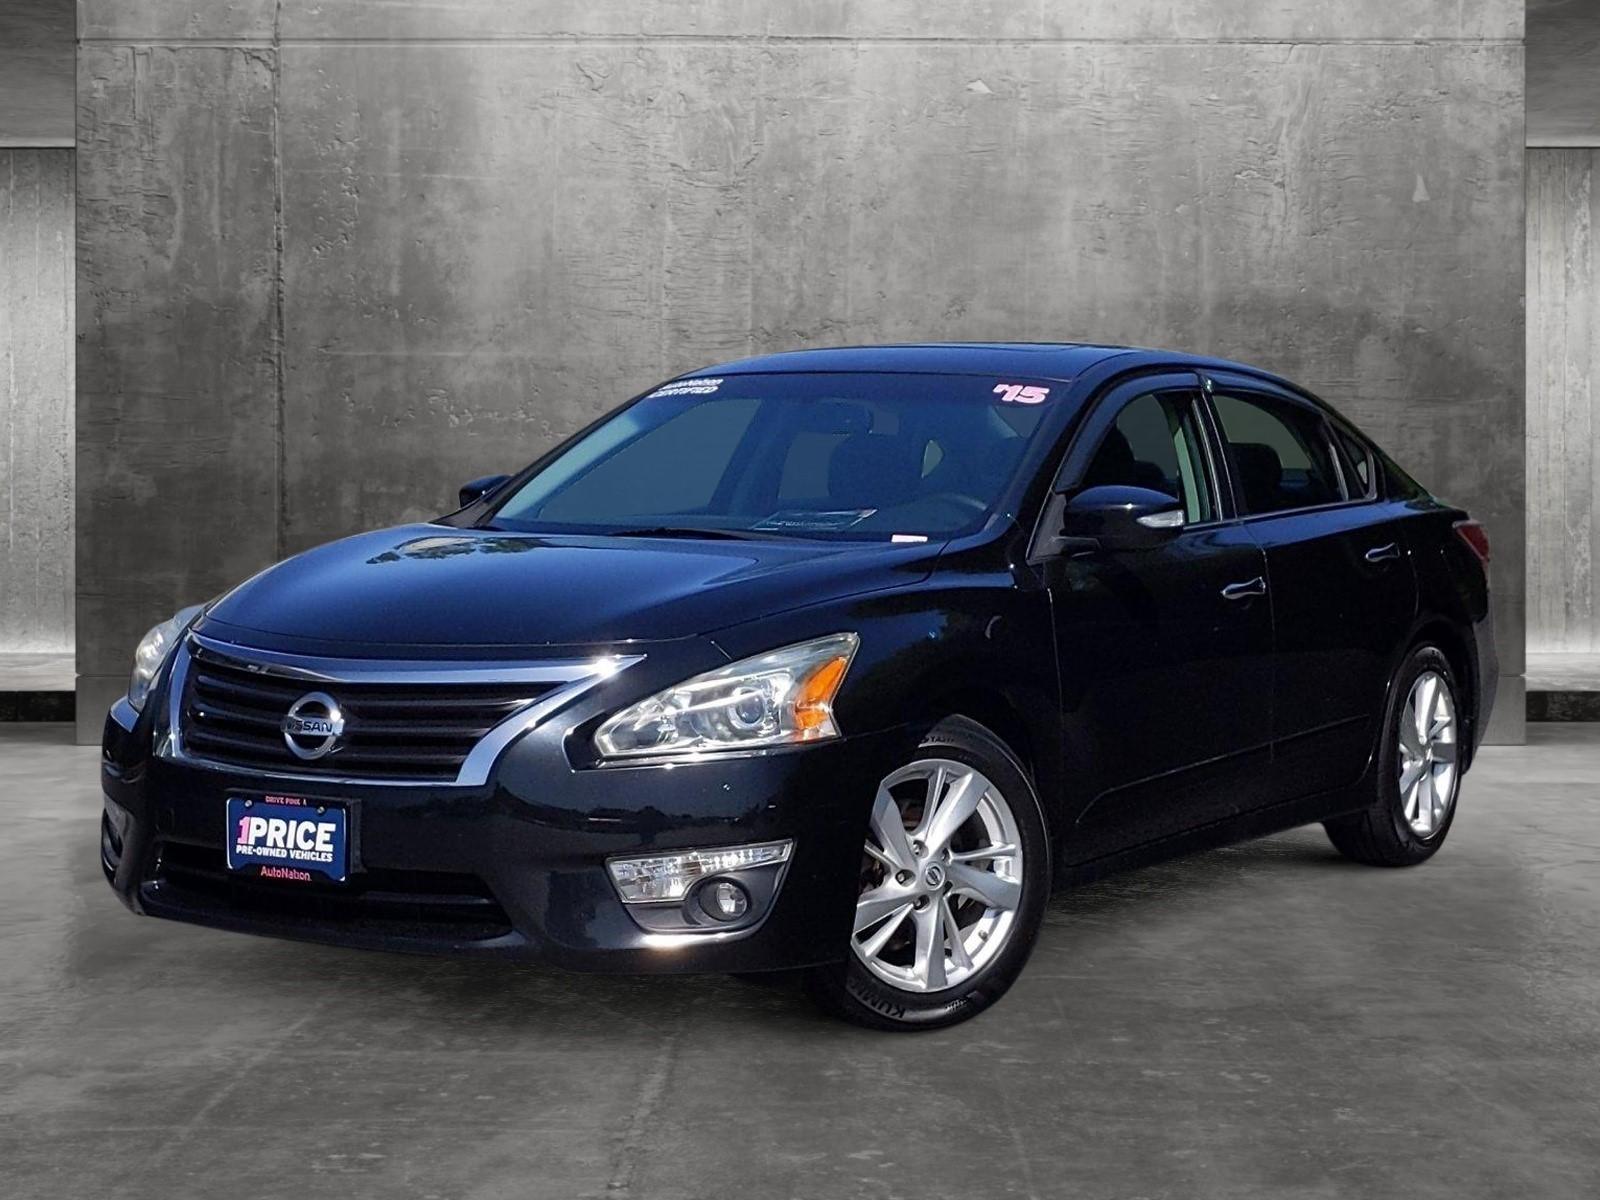 2015 Nissan Altima Vehicle Photo in Rockville, MD 20852